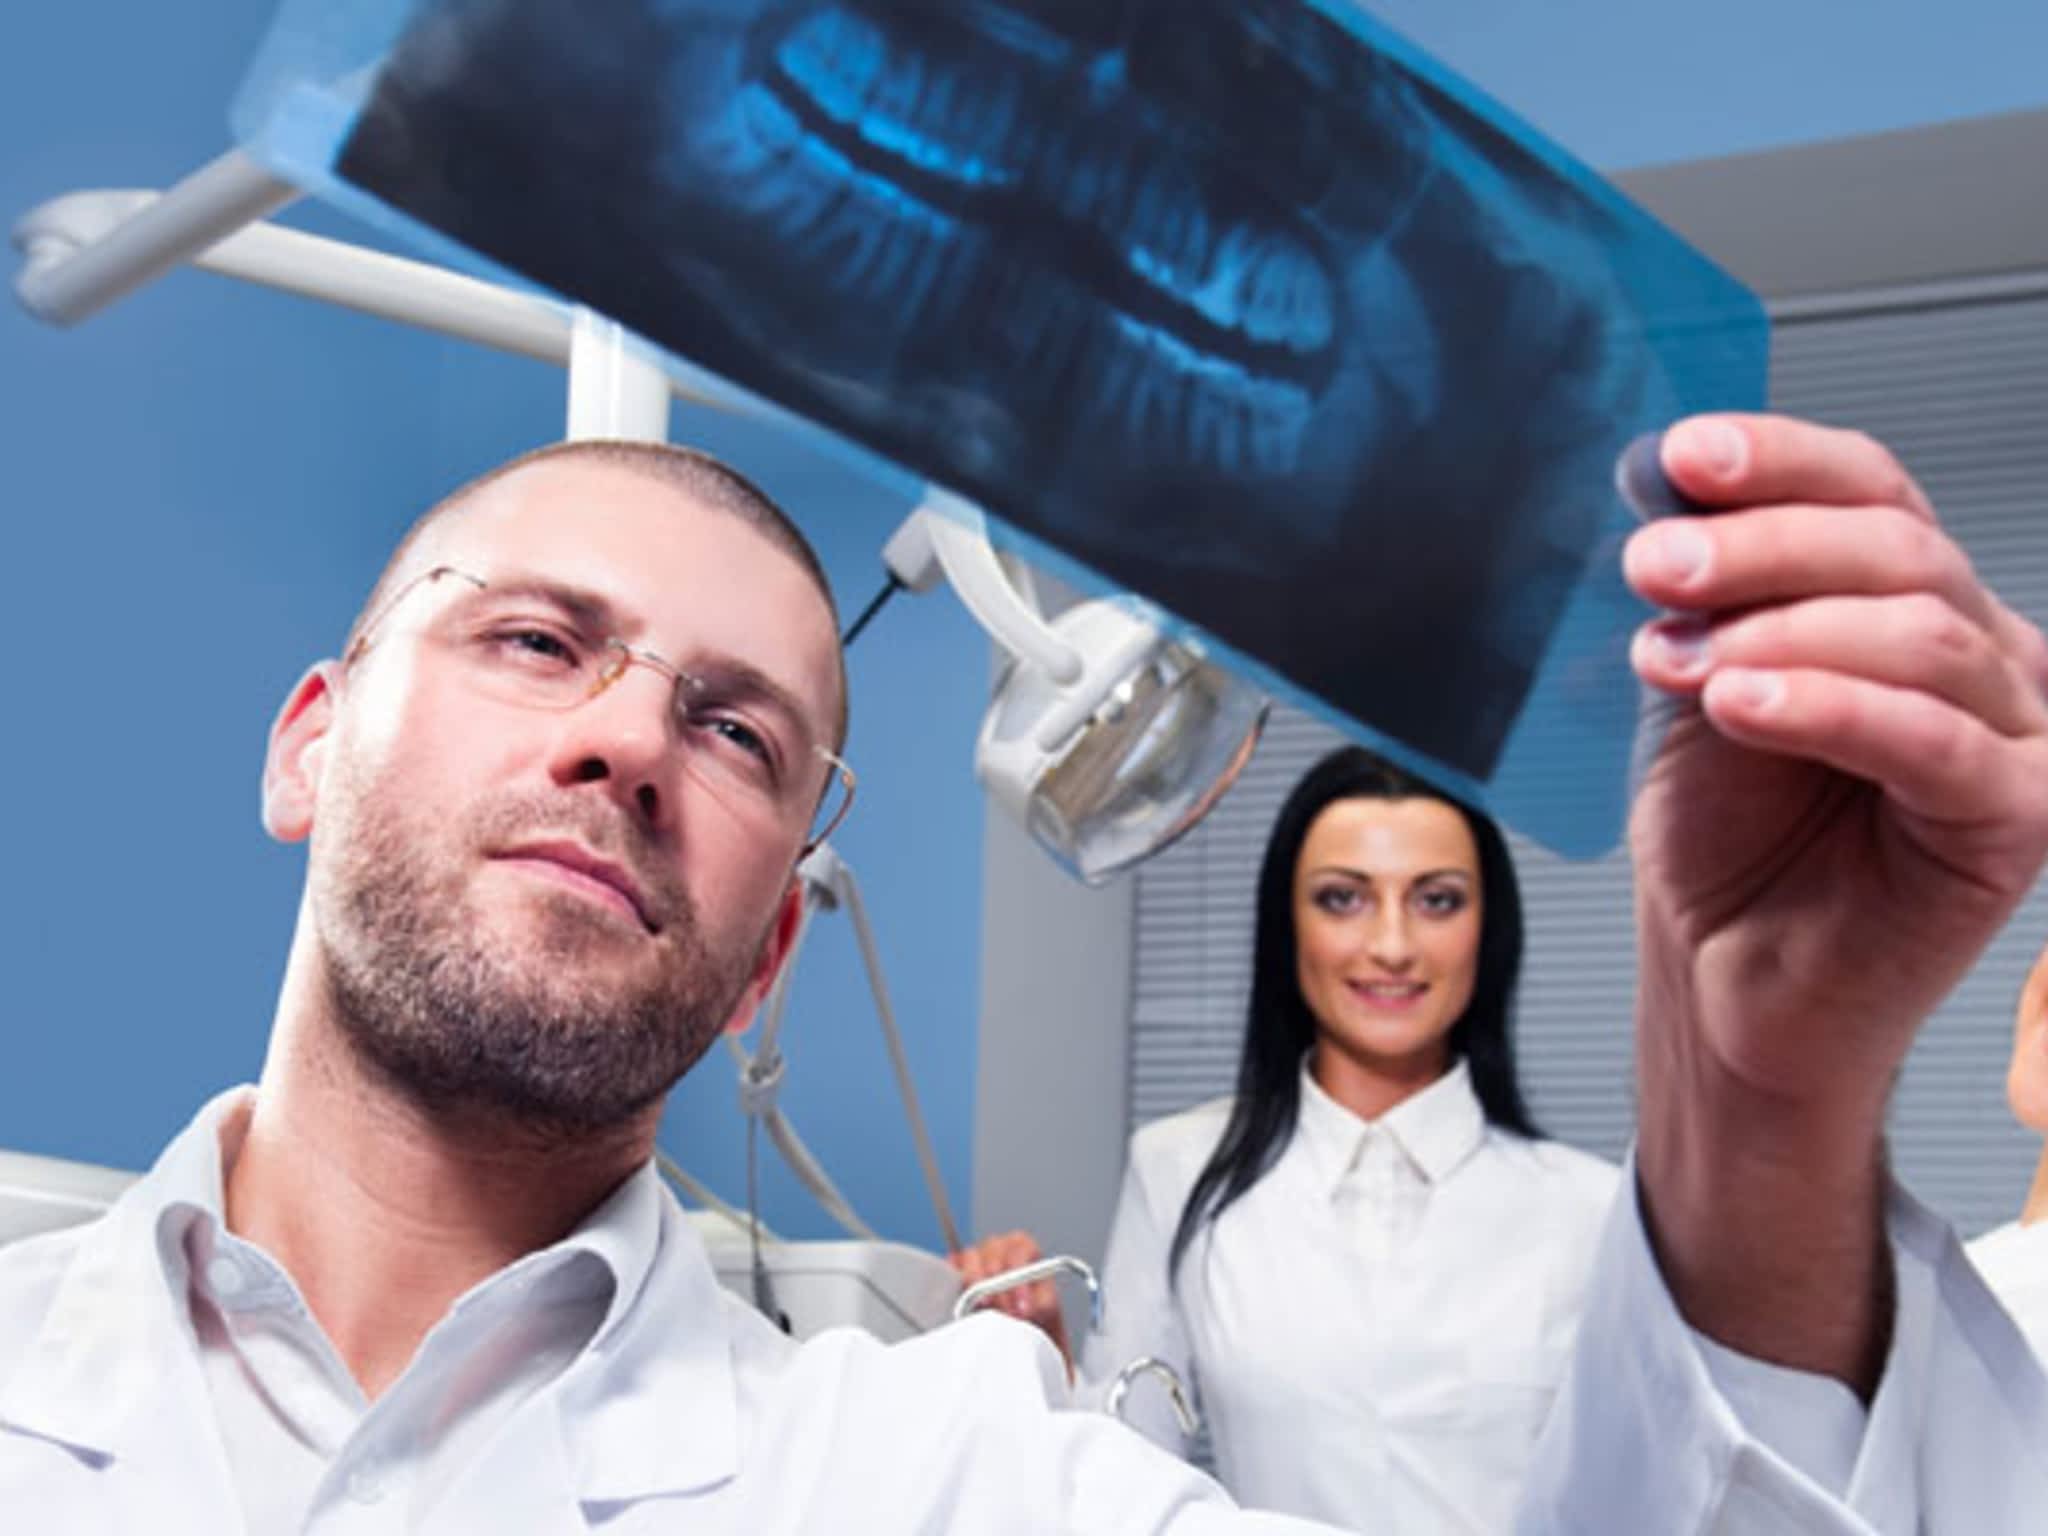 photo Mississauga Dental Specialists